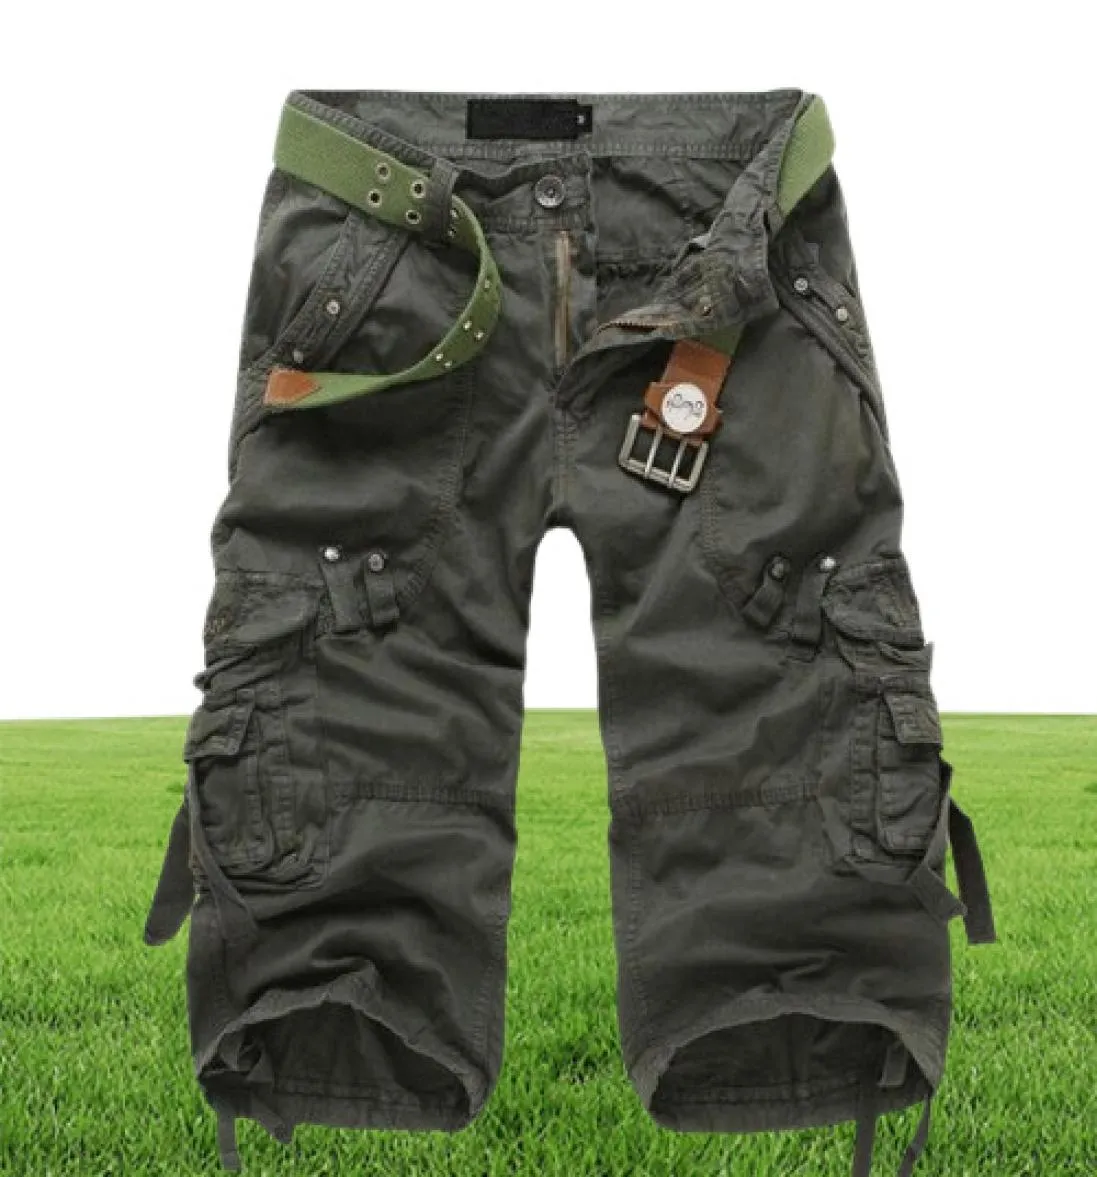 Tactical Camouflage Camo Cargo Shorts Men 2019 New Men039s Casual Shorts Male Loose Work Man Short Pants 29408339674